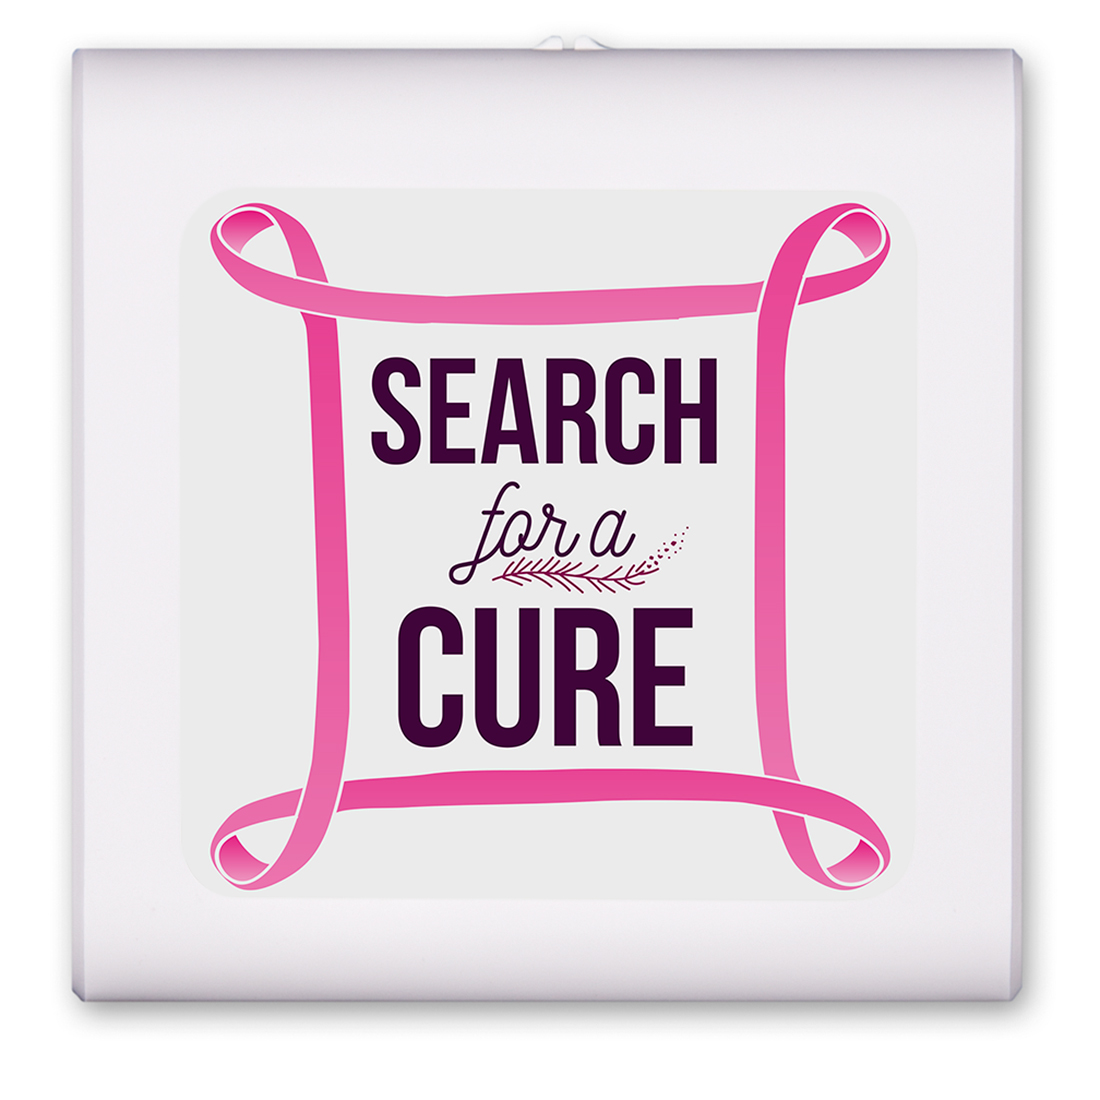 Breast Cancer "Fight for a Cure" - #2566